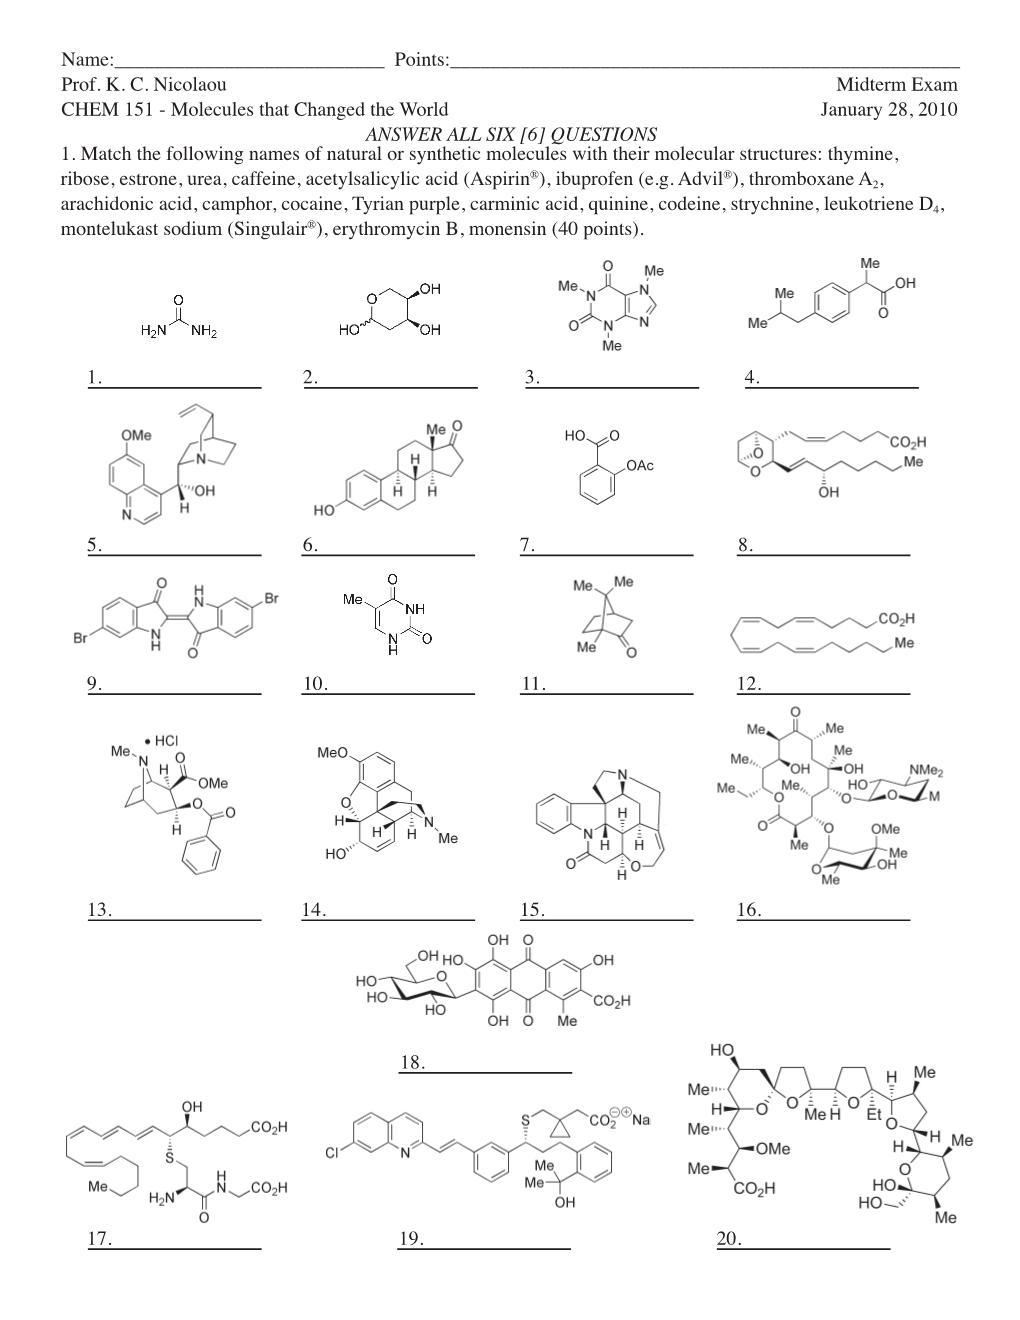 1. Match the Following Names of Natural Or Synthetic Molecules With